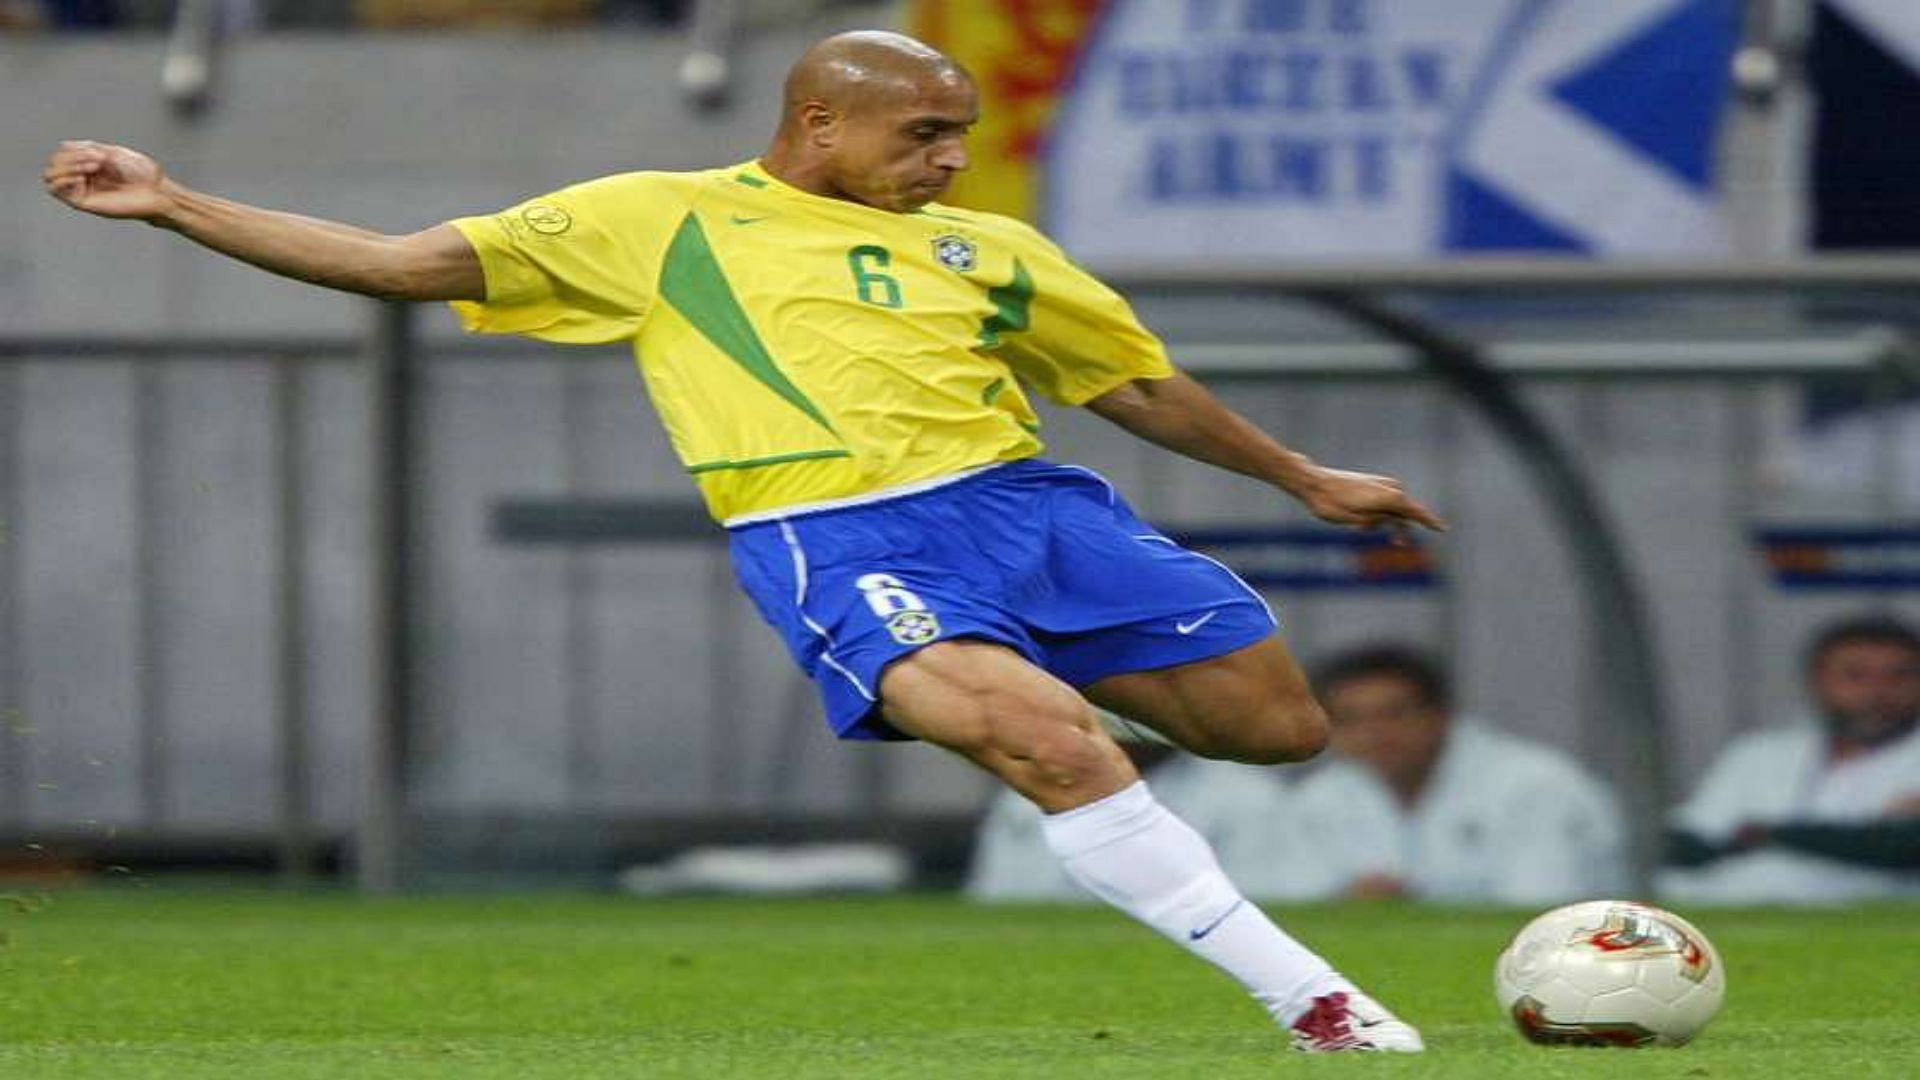 Roberto Carlos was blessed with a cannon of a left foot.